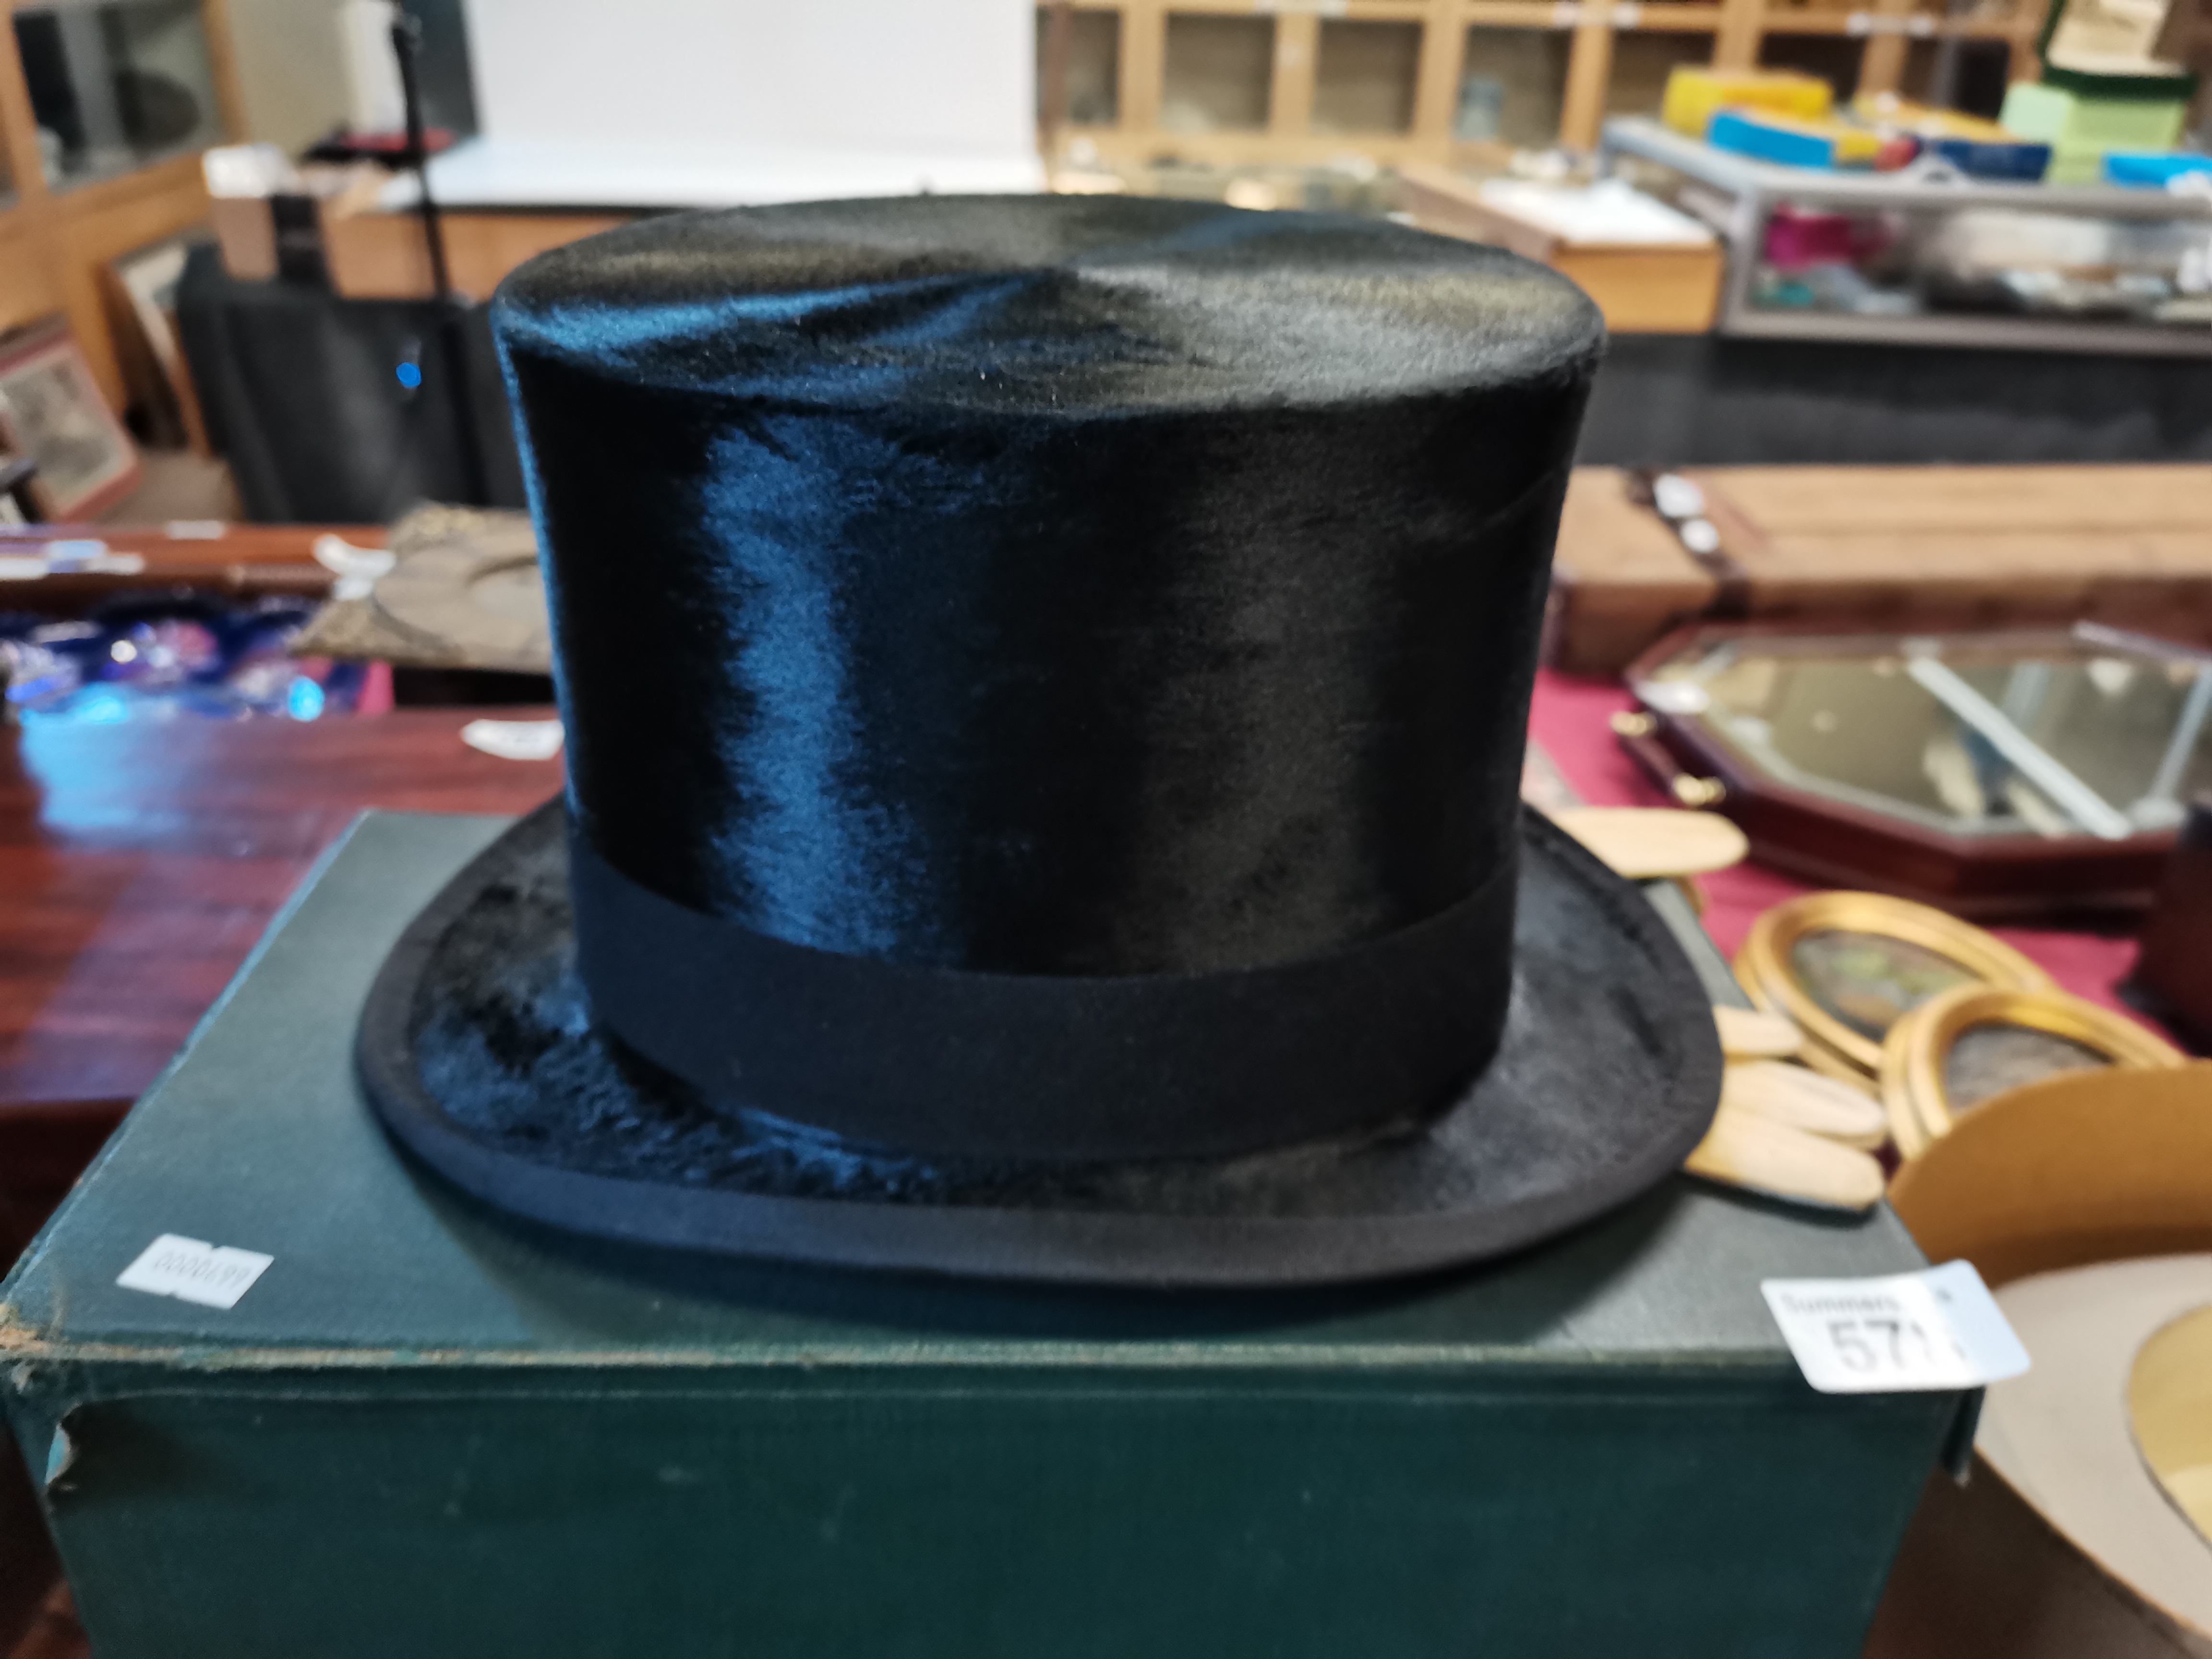 Top hat by West & co London in box with gloves